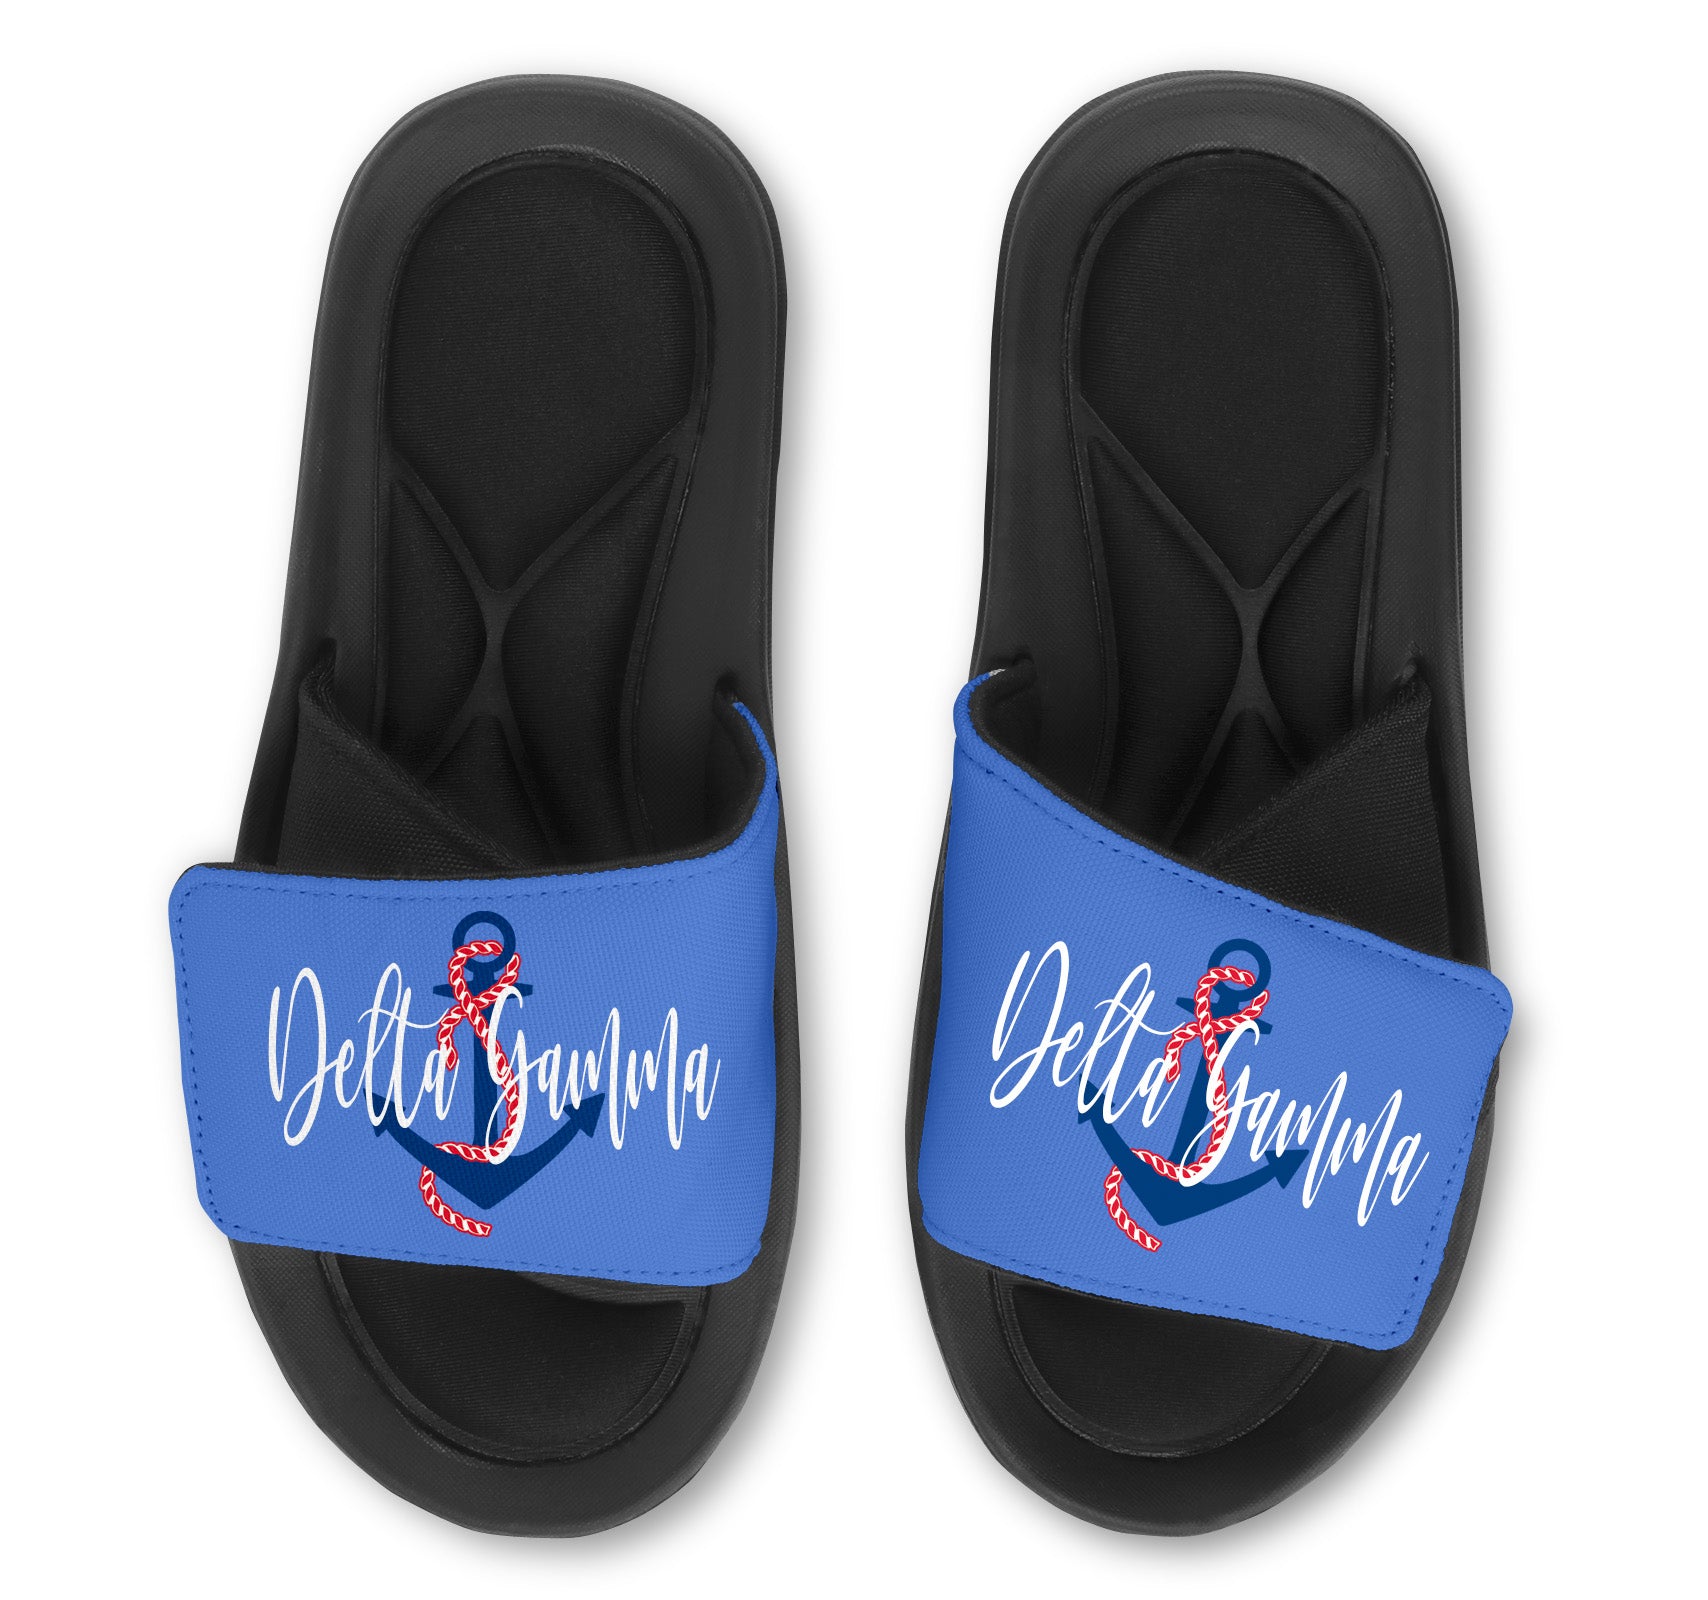 Alpha Delta Gamma Slides - Customize With Your Name